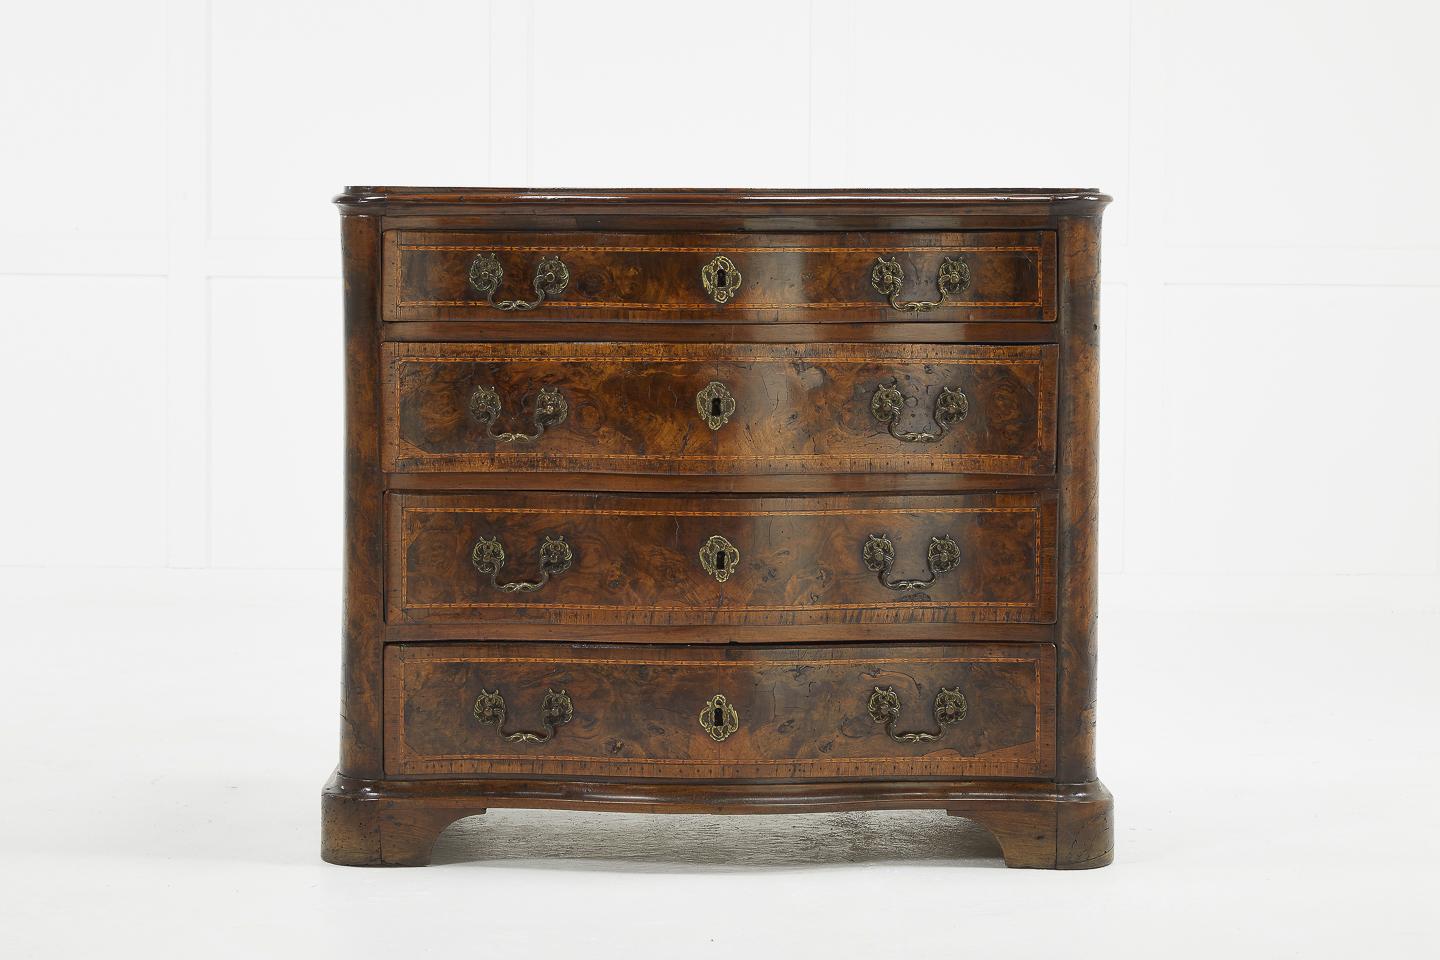 Very nice small proportioned 18th century burr walnut commode with four drawers.